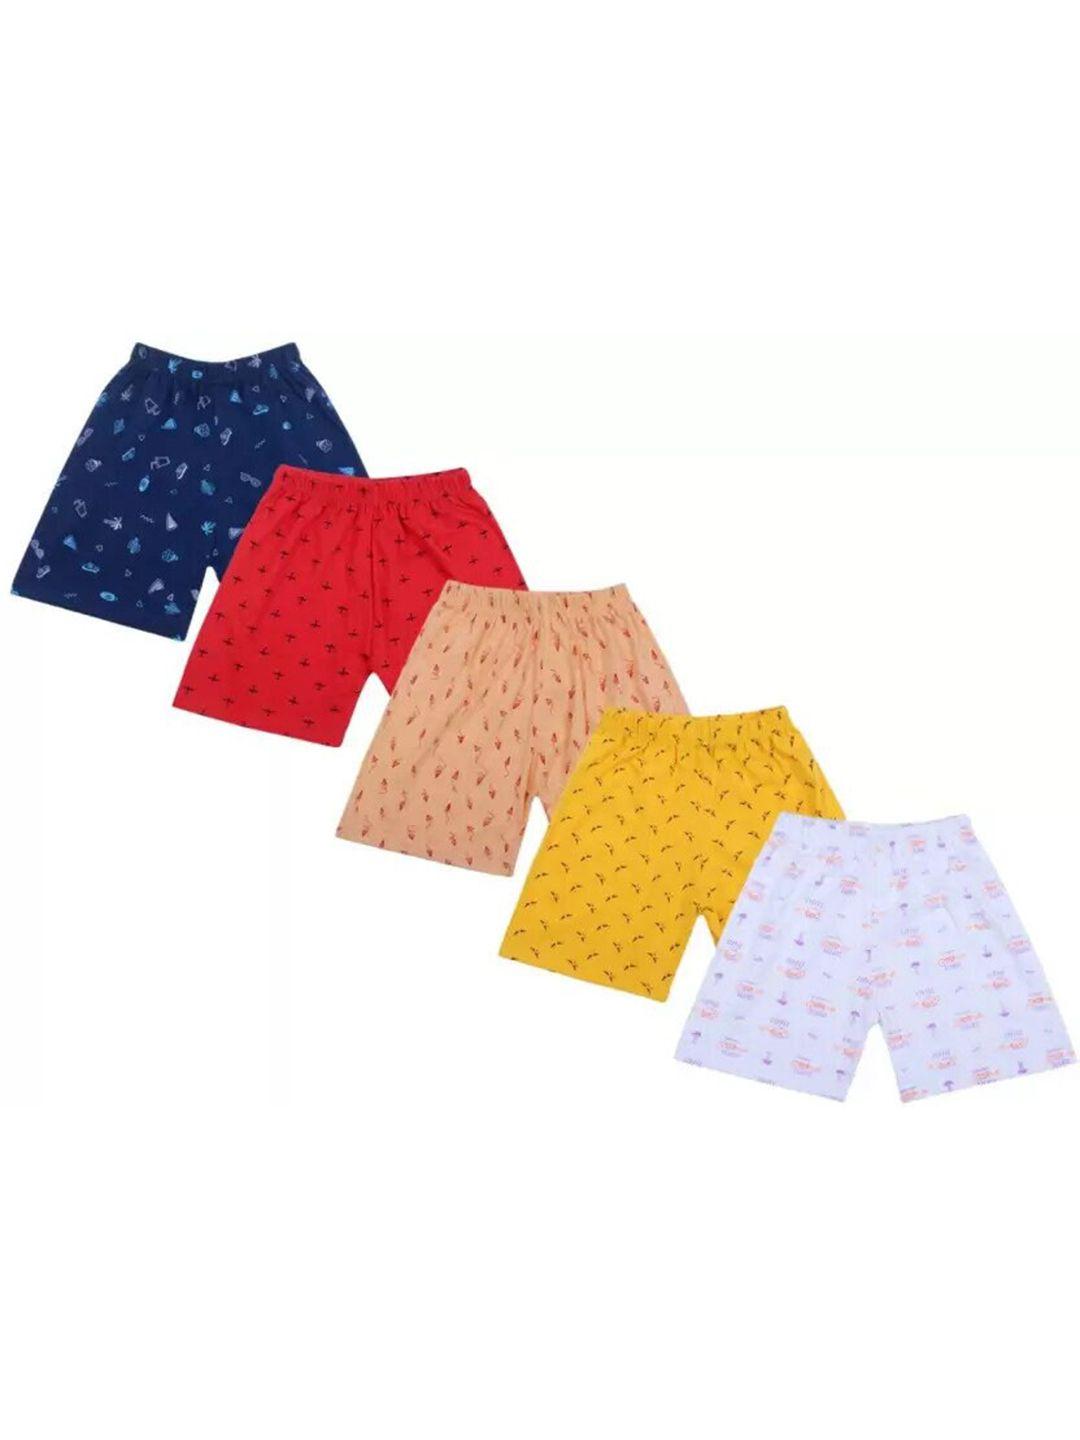 baesd boys pack of 5 assorted printed shorts